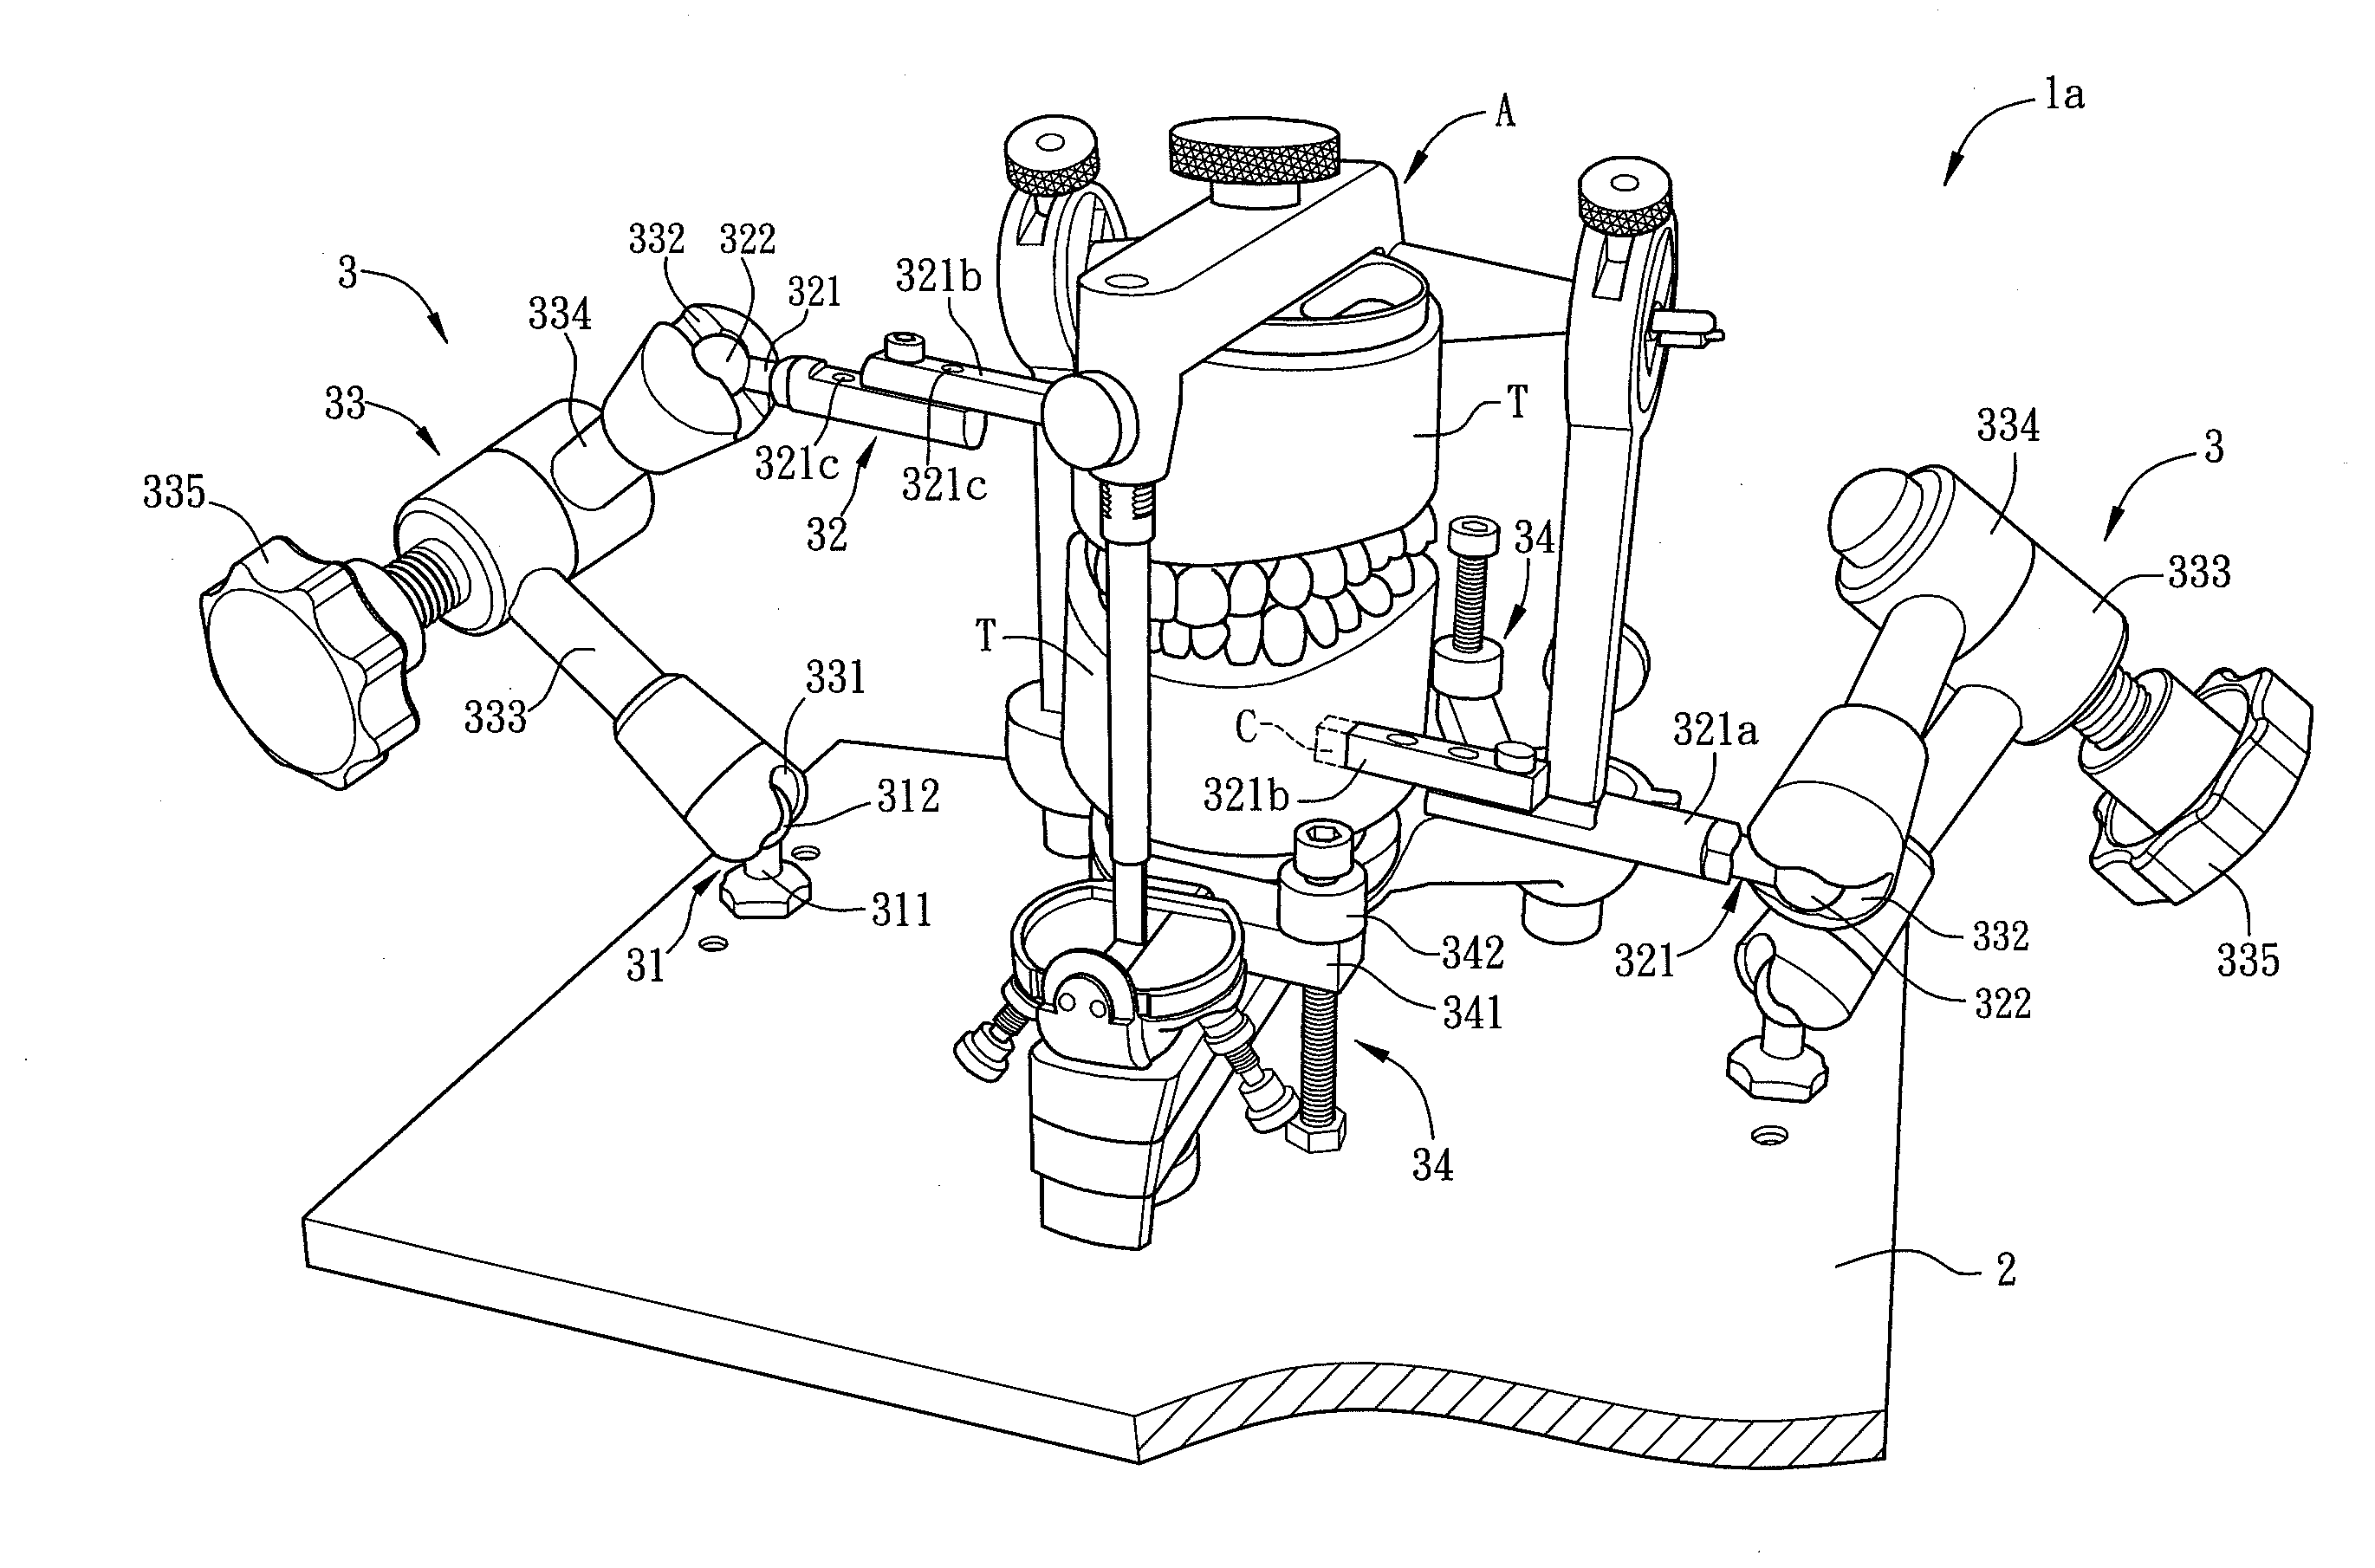 Auxiliary device for articulator